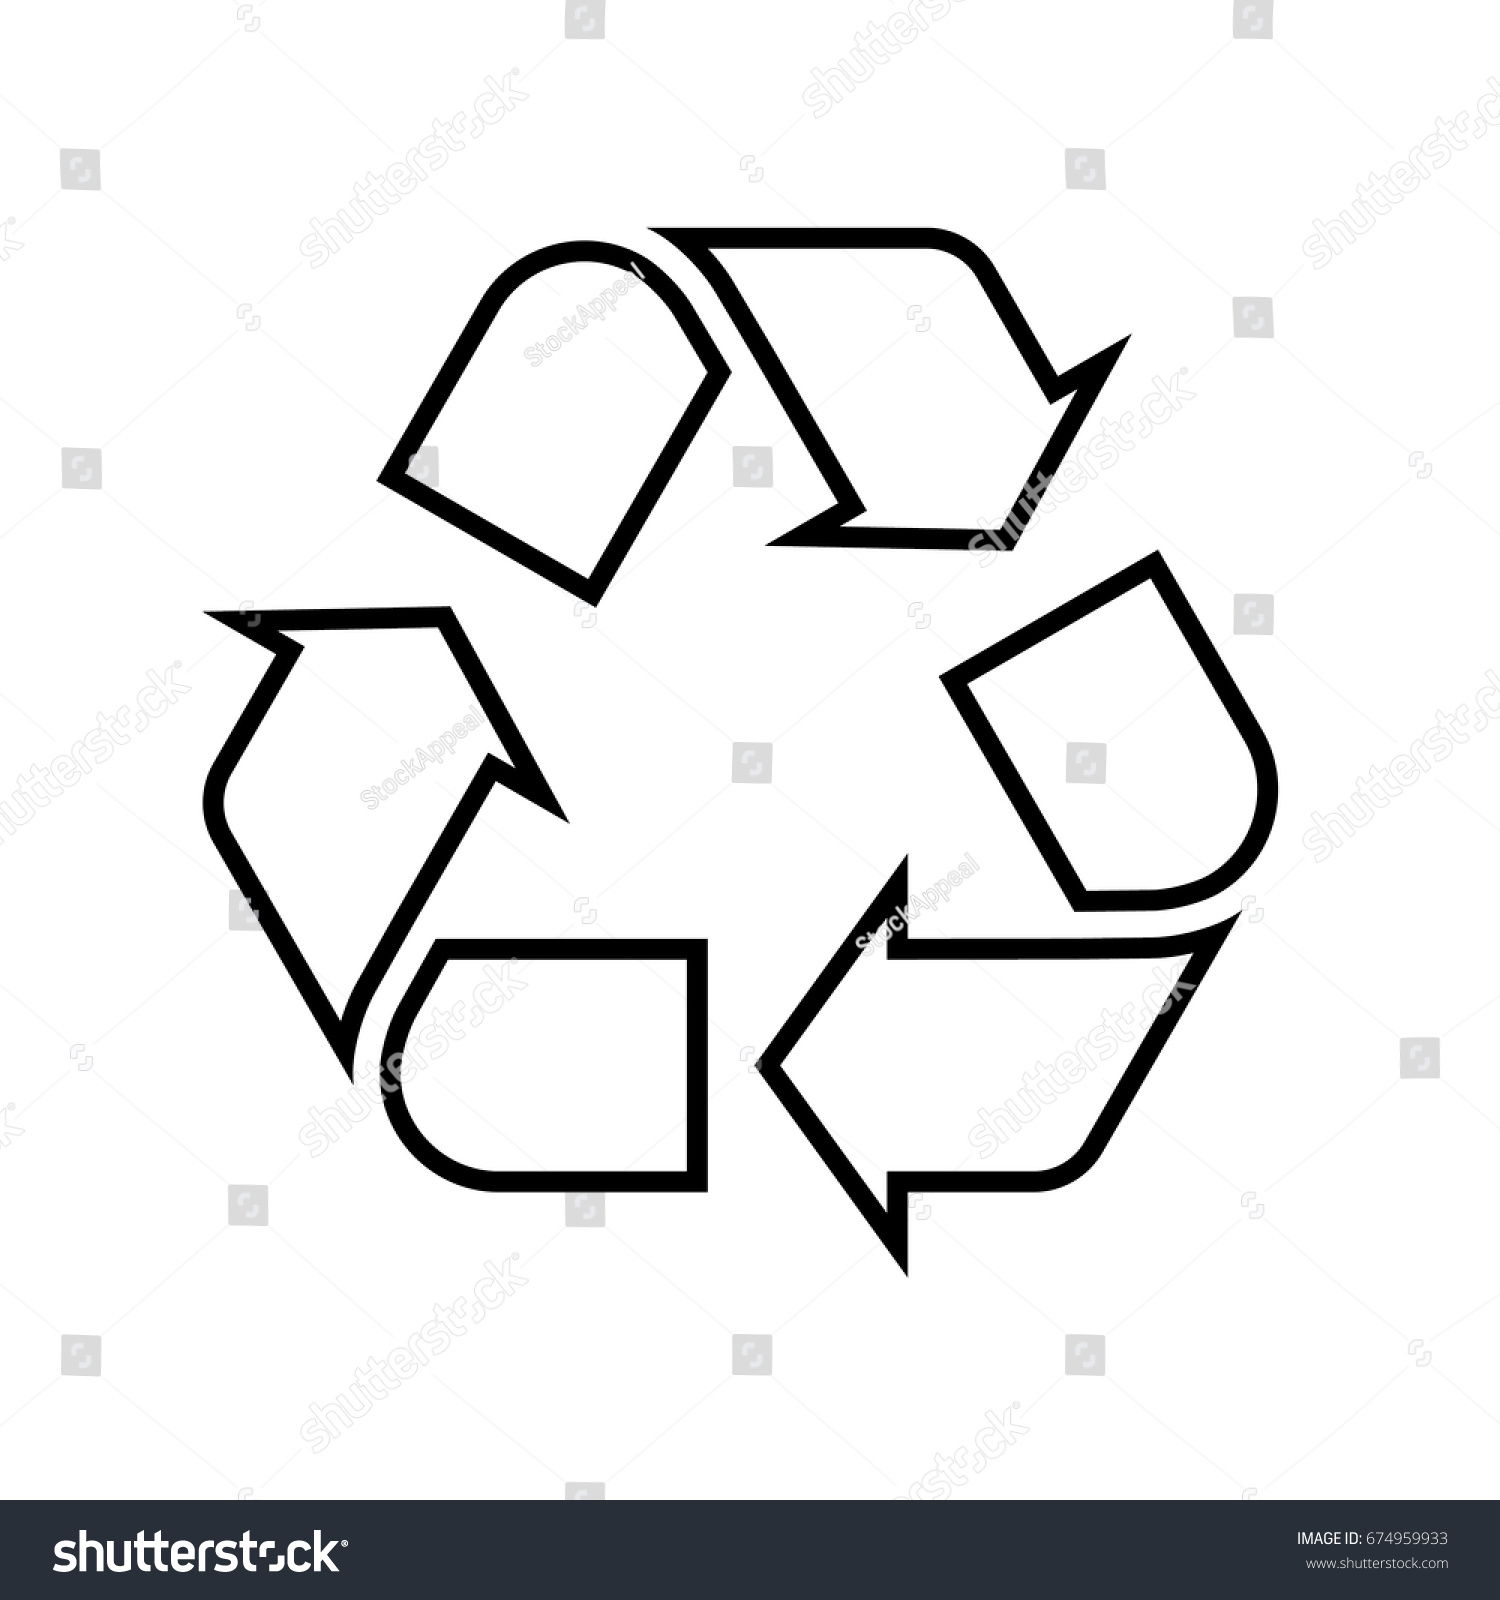 Vector outlined recycle sign icon #674959933